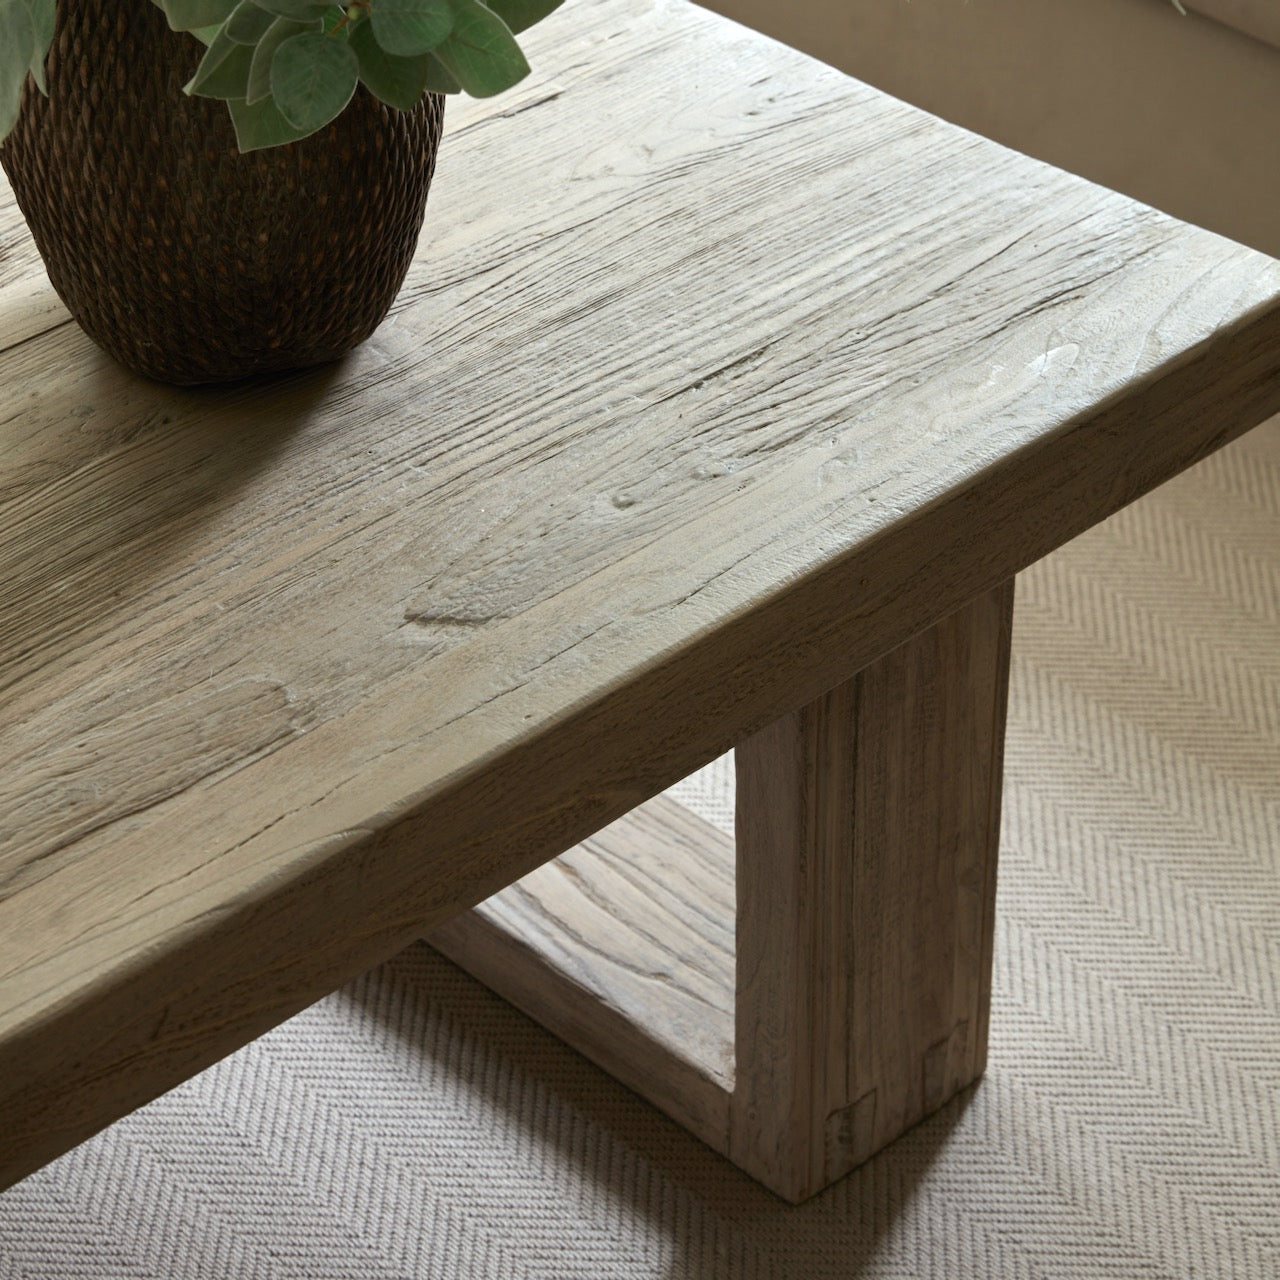 Marlow Reclaimed Wooden Coffee Table